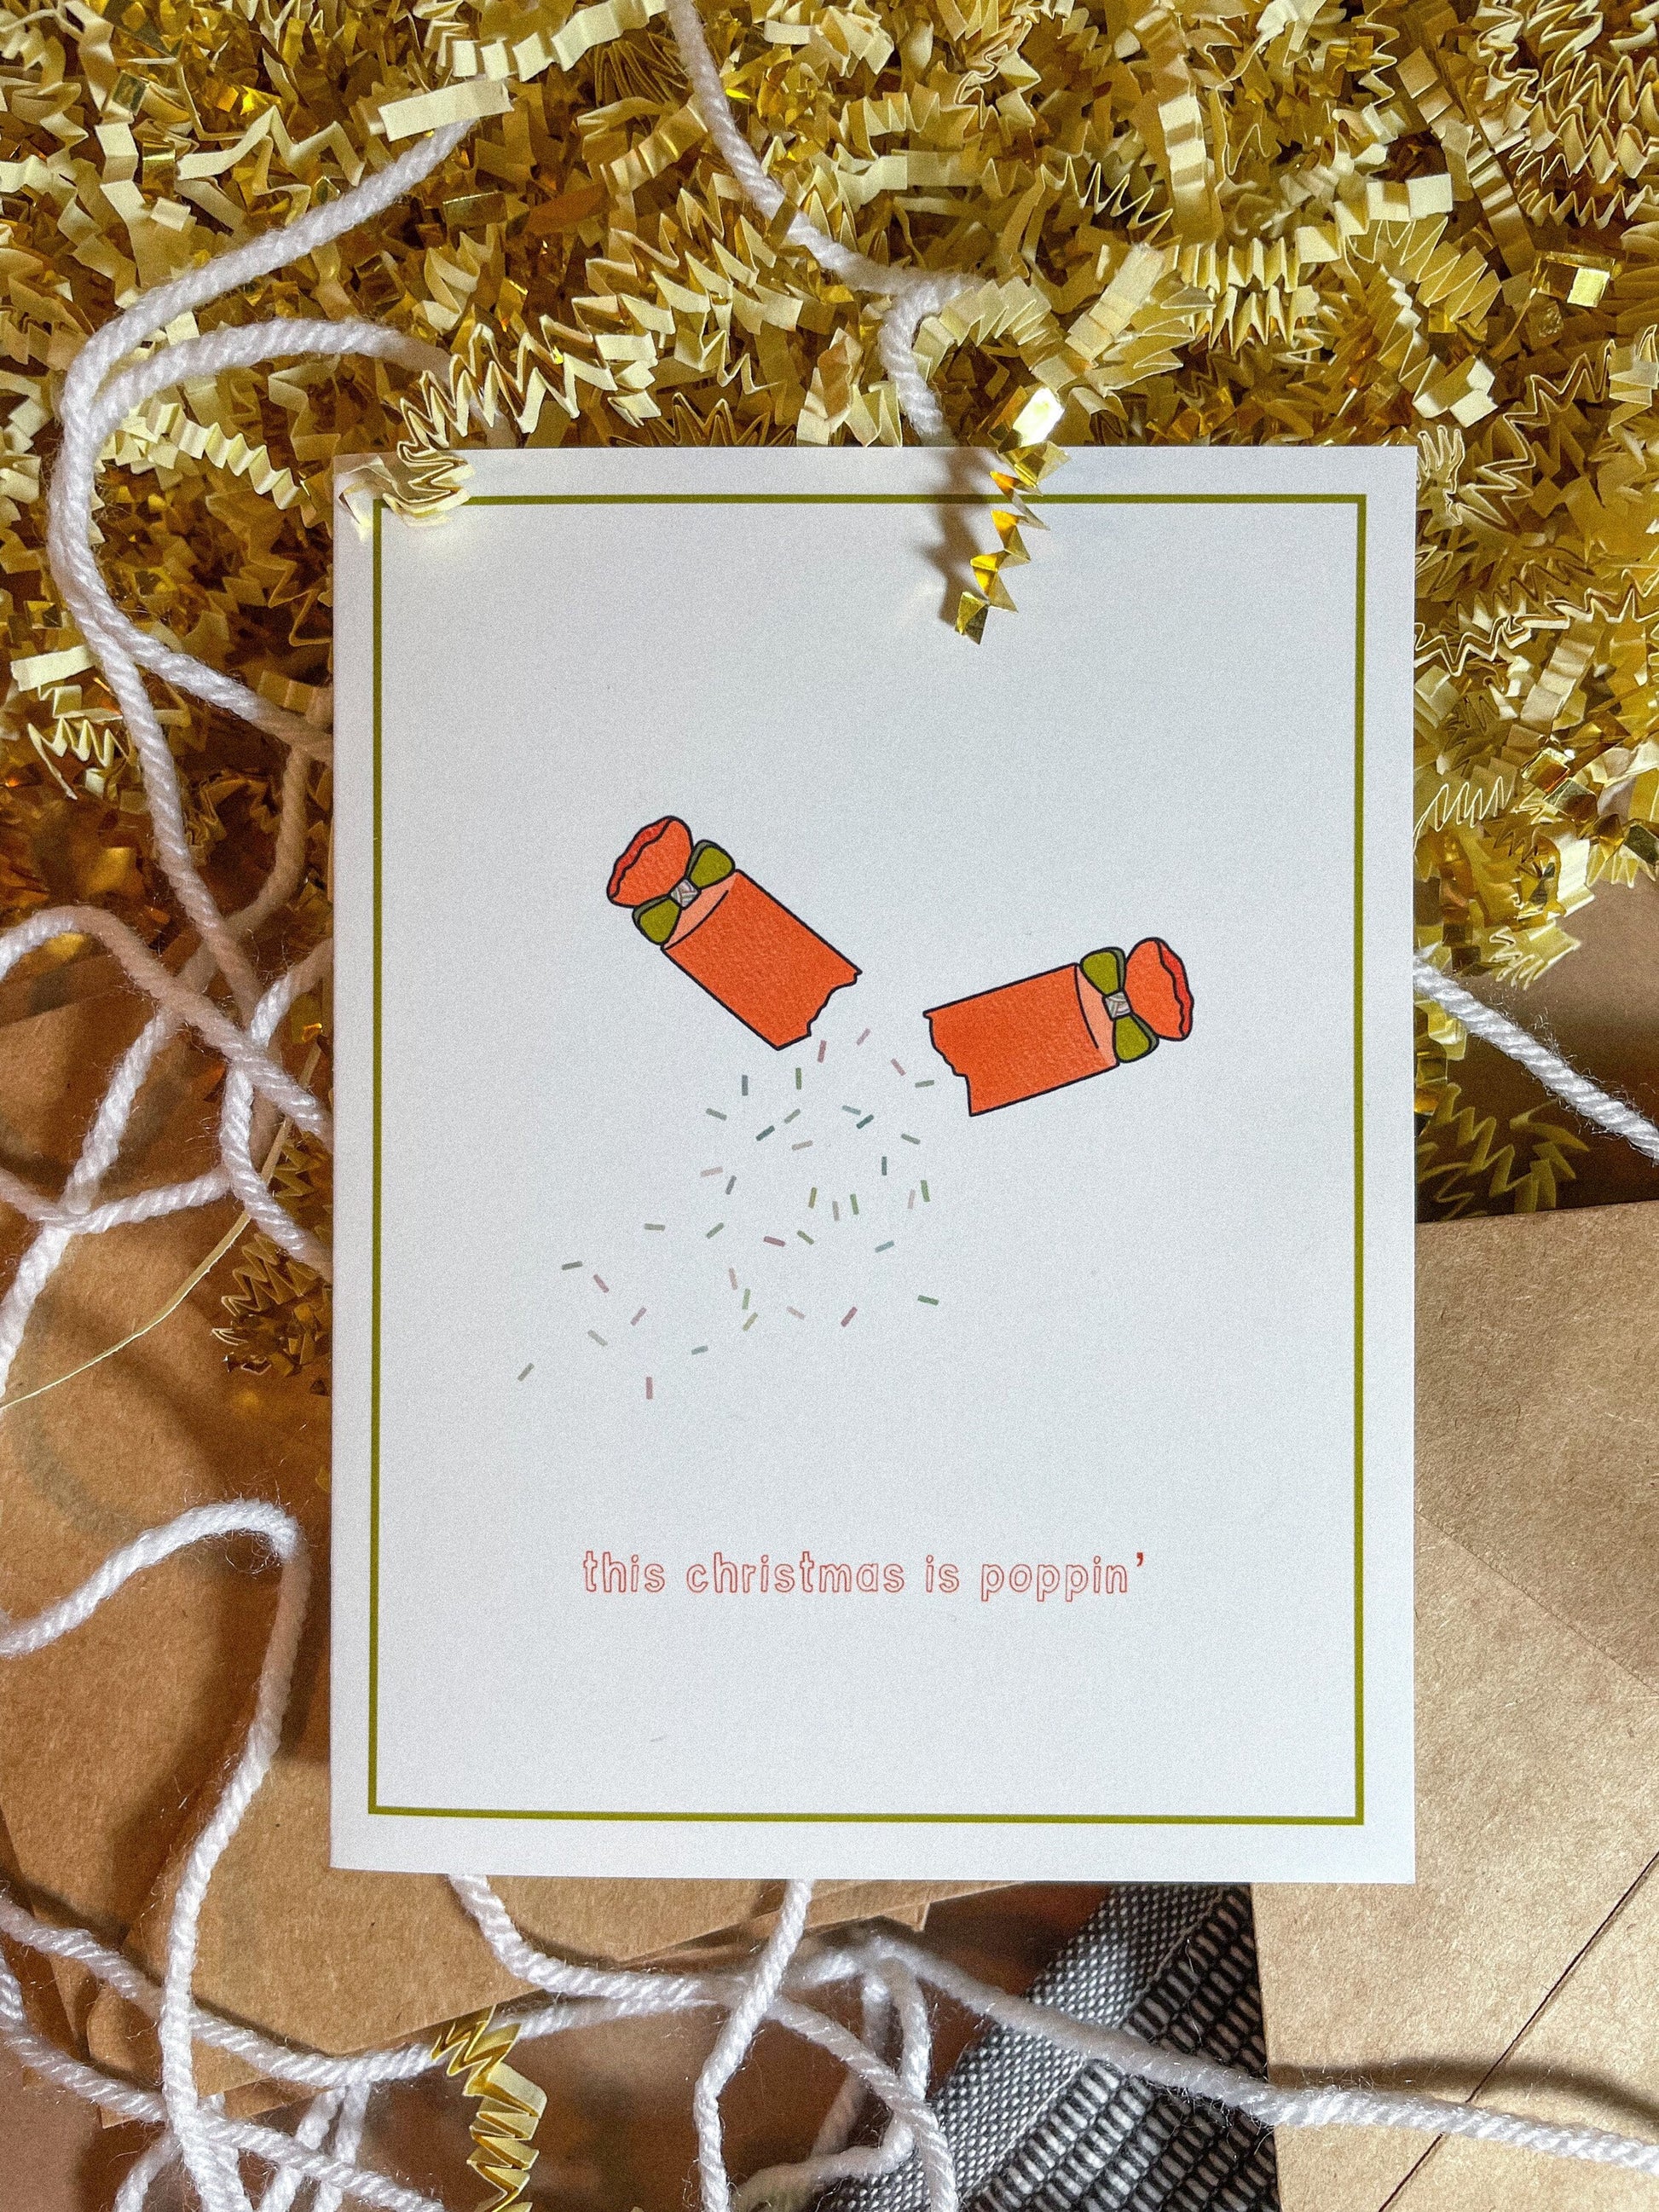 redish orange party popper mid-pop with confetti spilling out and the text this christmas is popppin